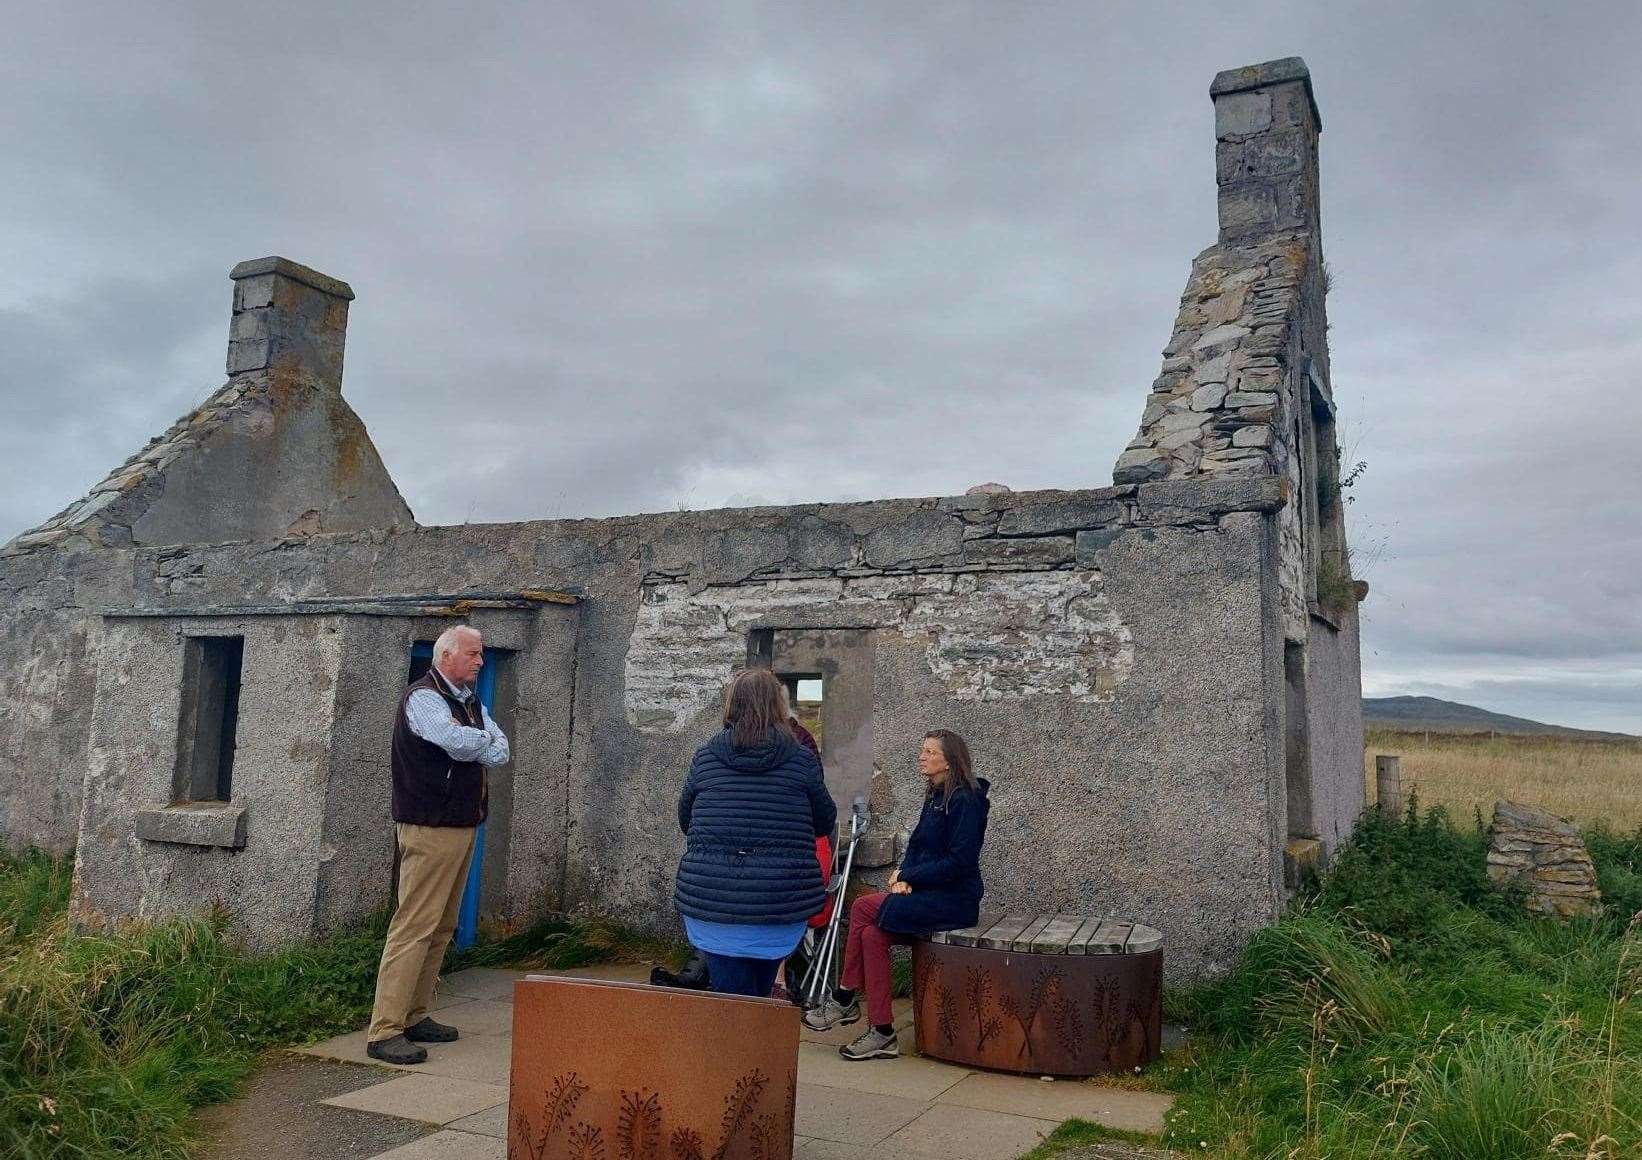 Ariane Burgess joined the representatives on a visit to the abandoned traveler's house on the Moine.